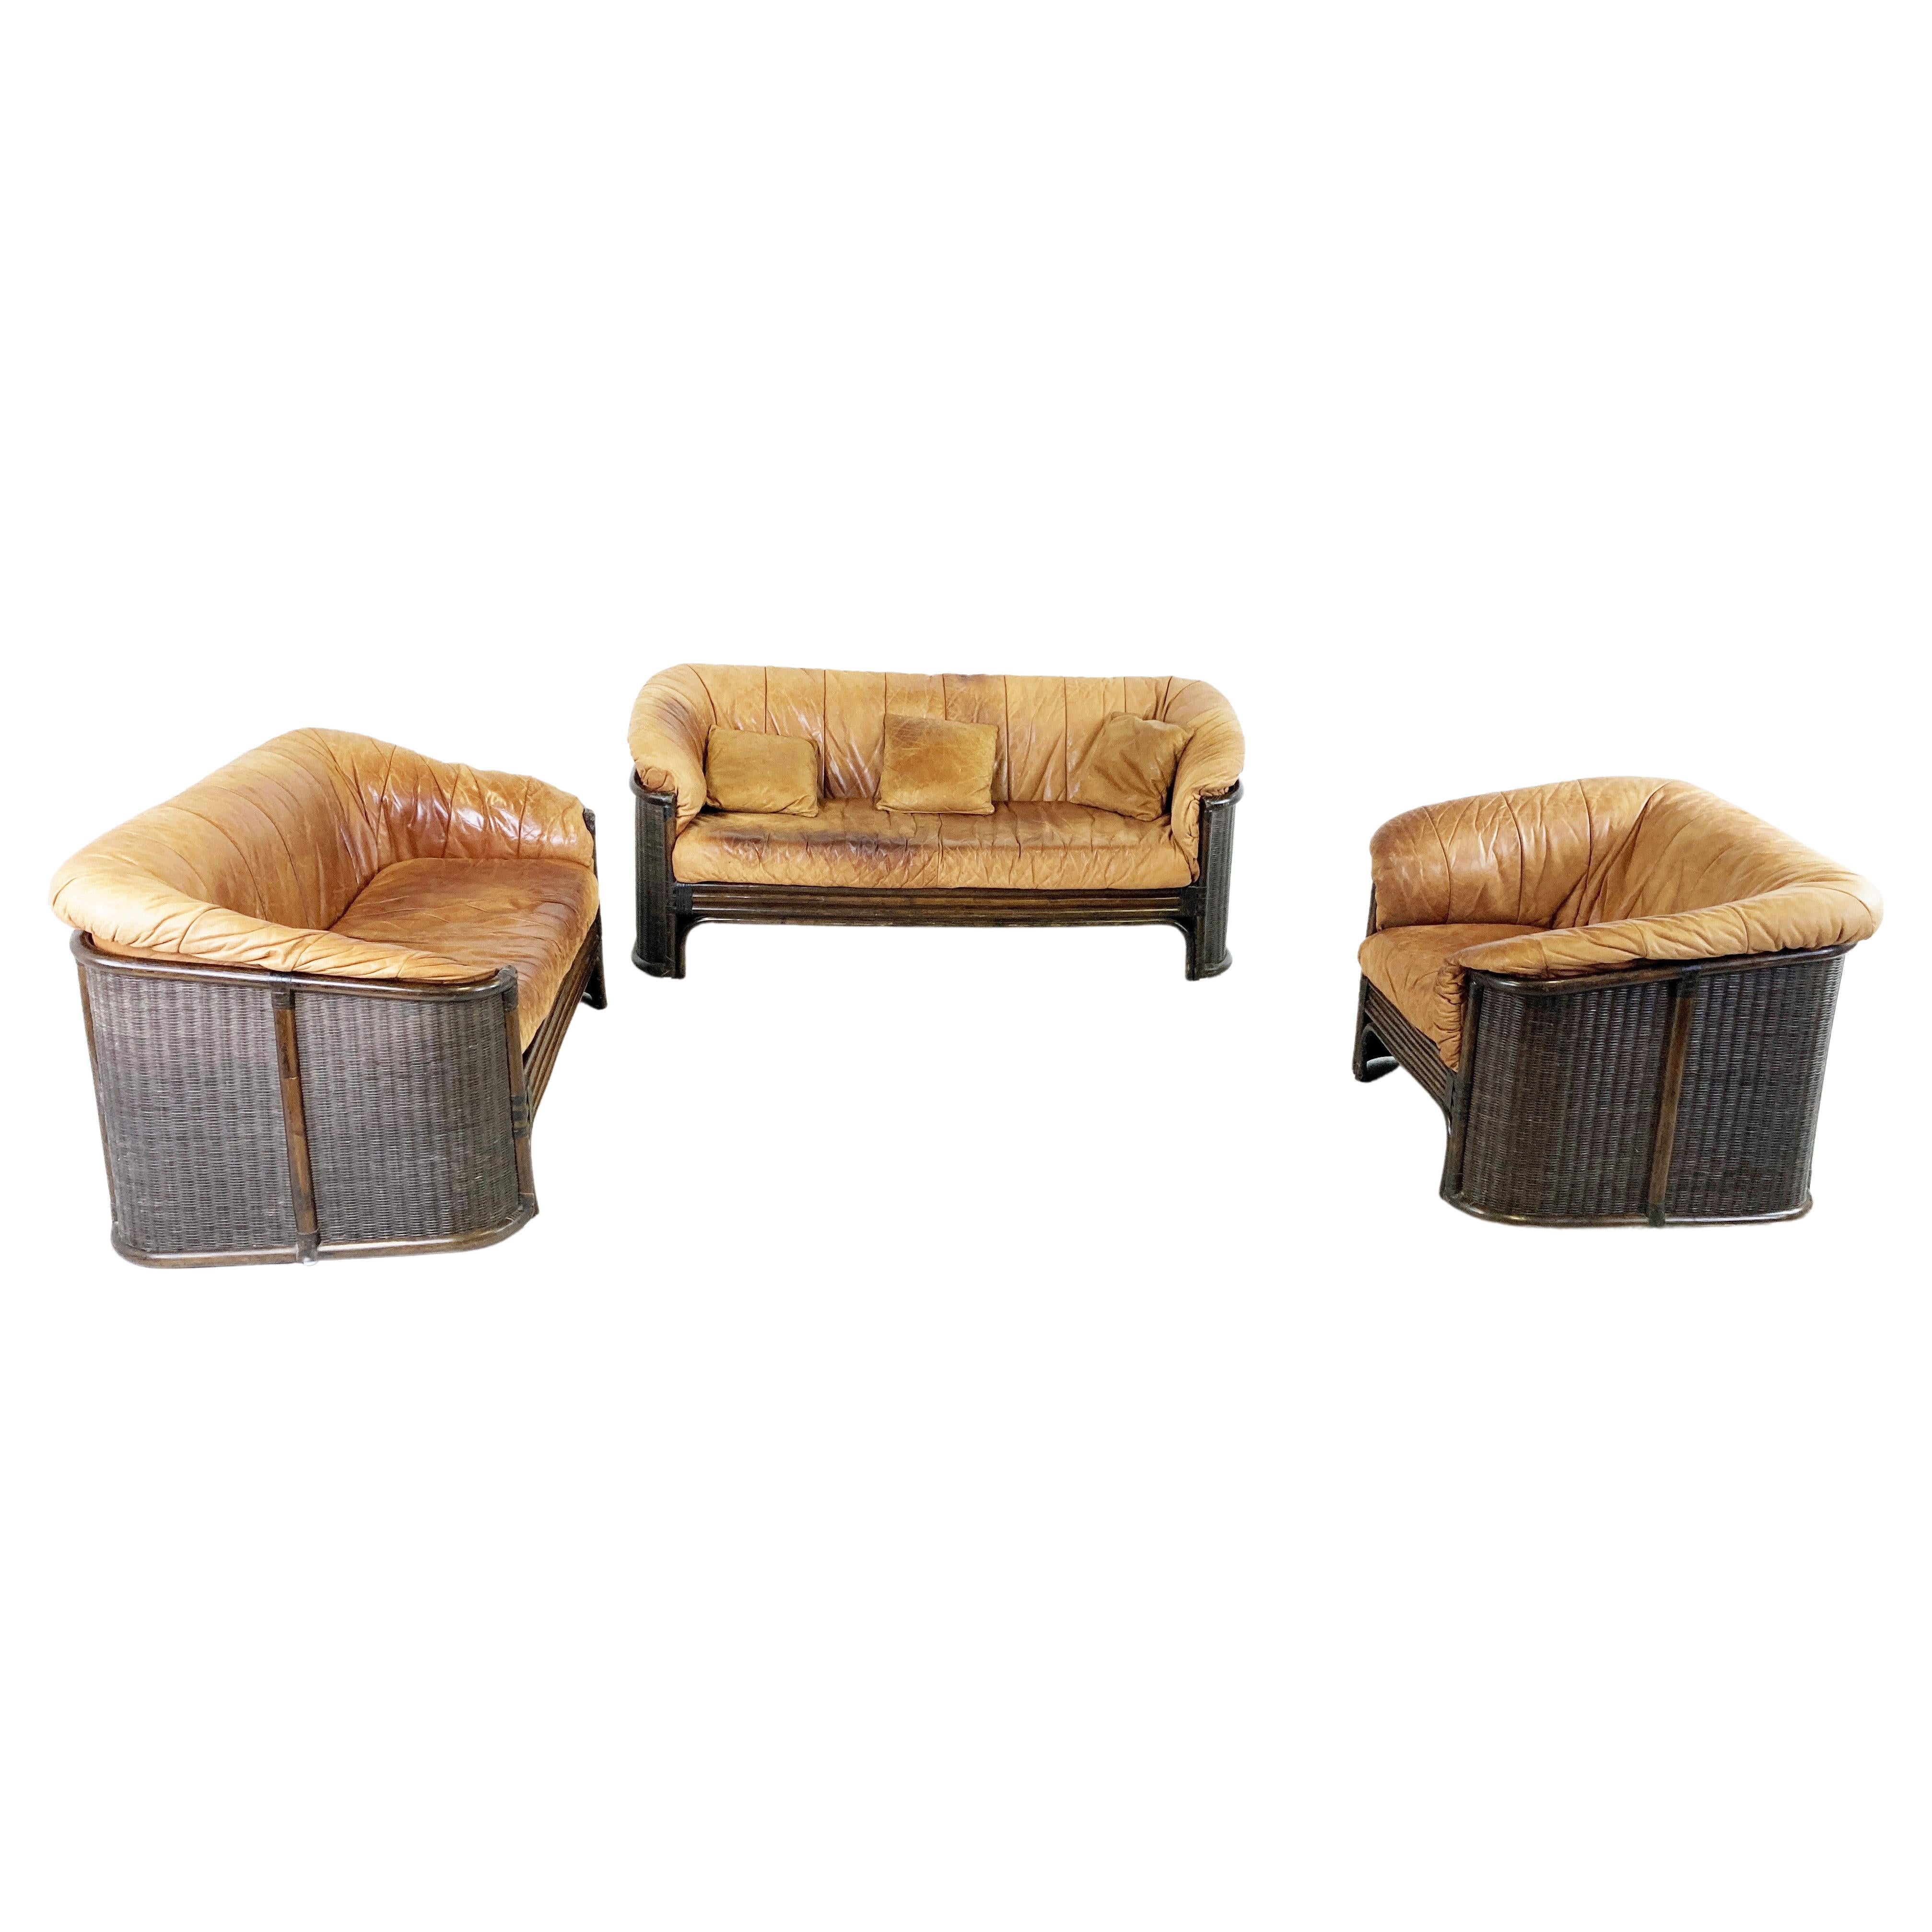 Vintage Wicker and Leather Sofa Set, 1960s